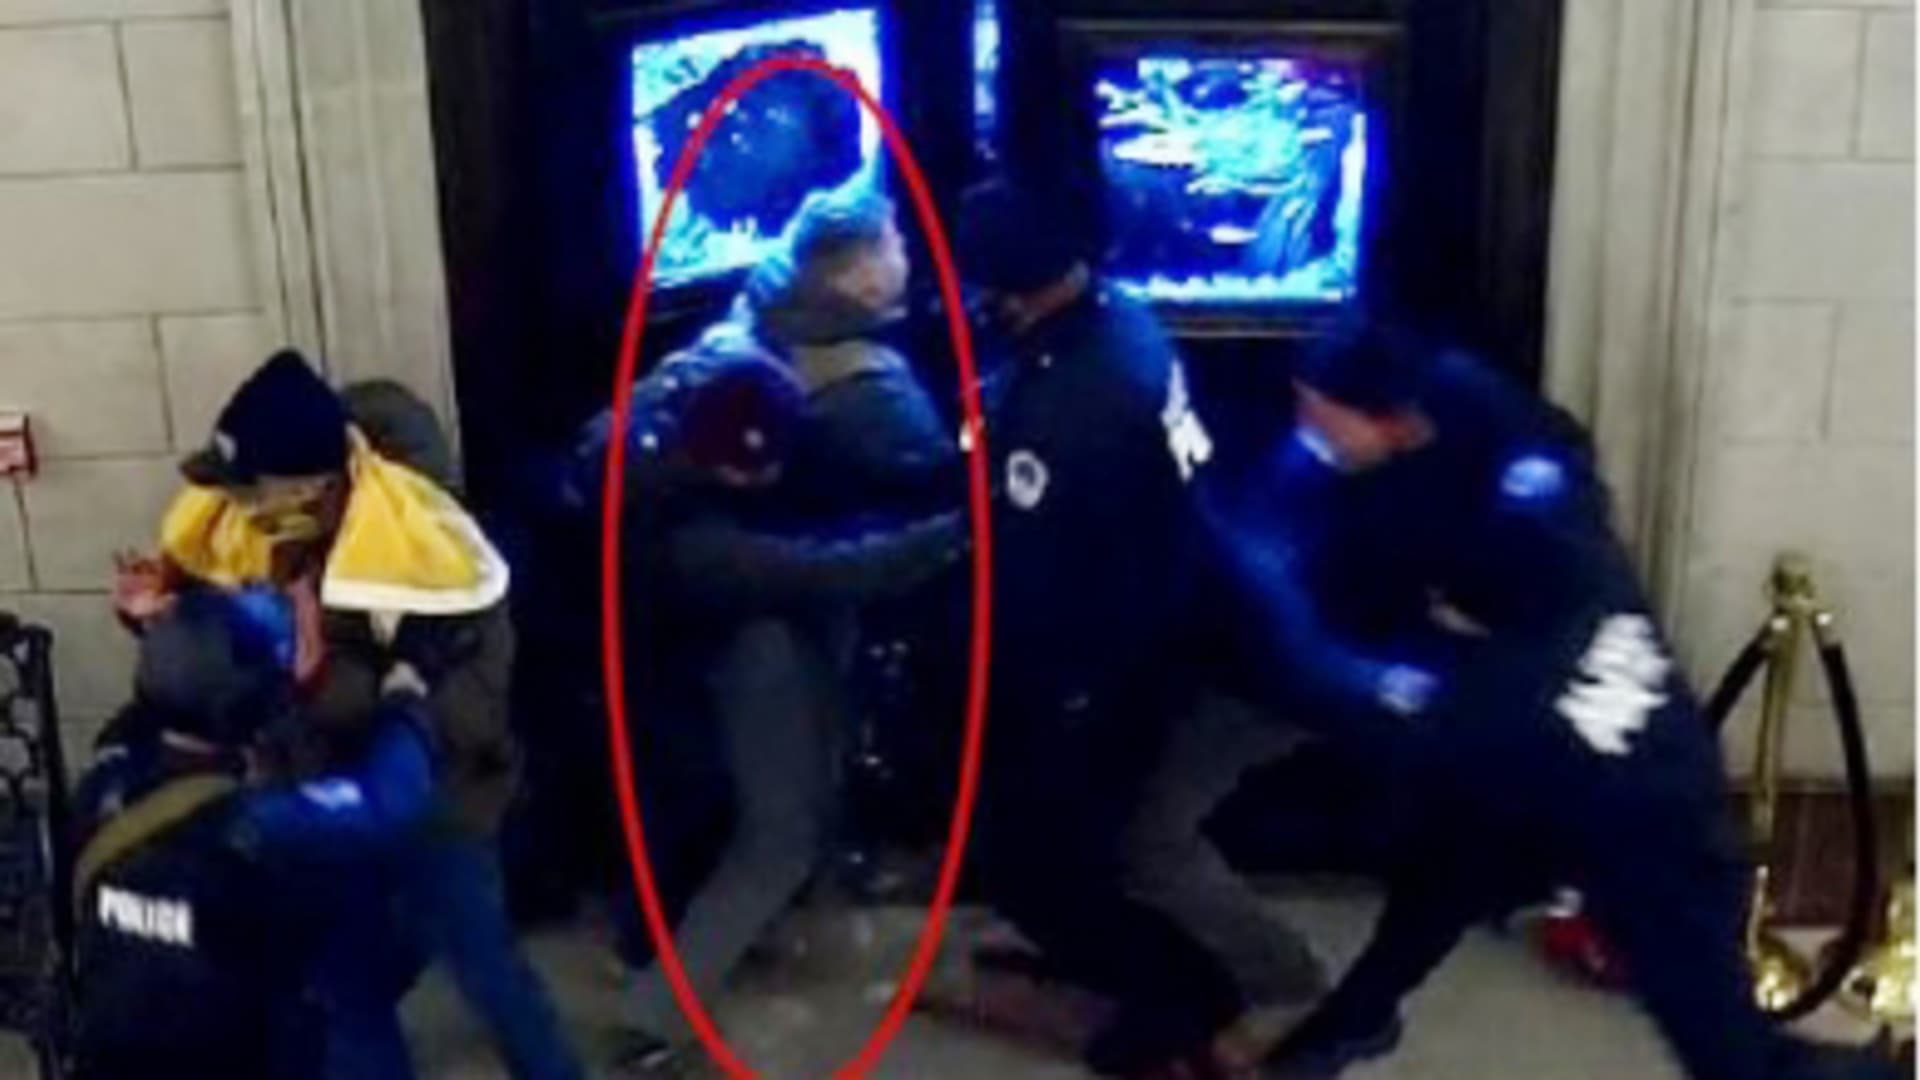 A still from a video released by the D.O.J. showing Christopher Warnagiris (circled in red), who is a Marine Corps commissioned officer stationed at the Marine Corps Base Quantico was arrested today in Virginia and charged with crimes related to the breach of the U.S. Capitol on Jan. 6.